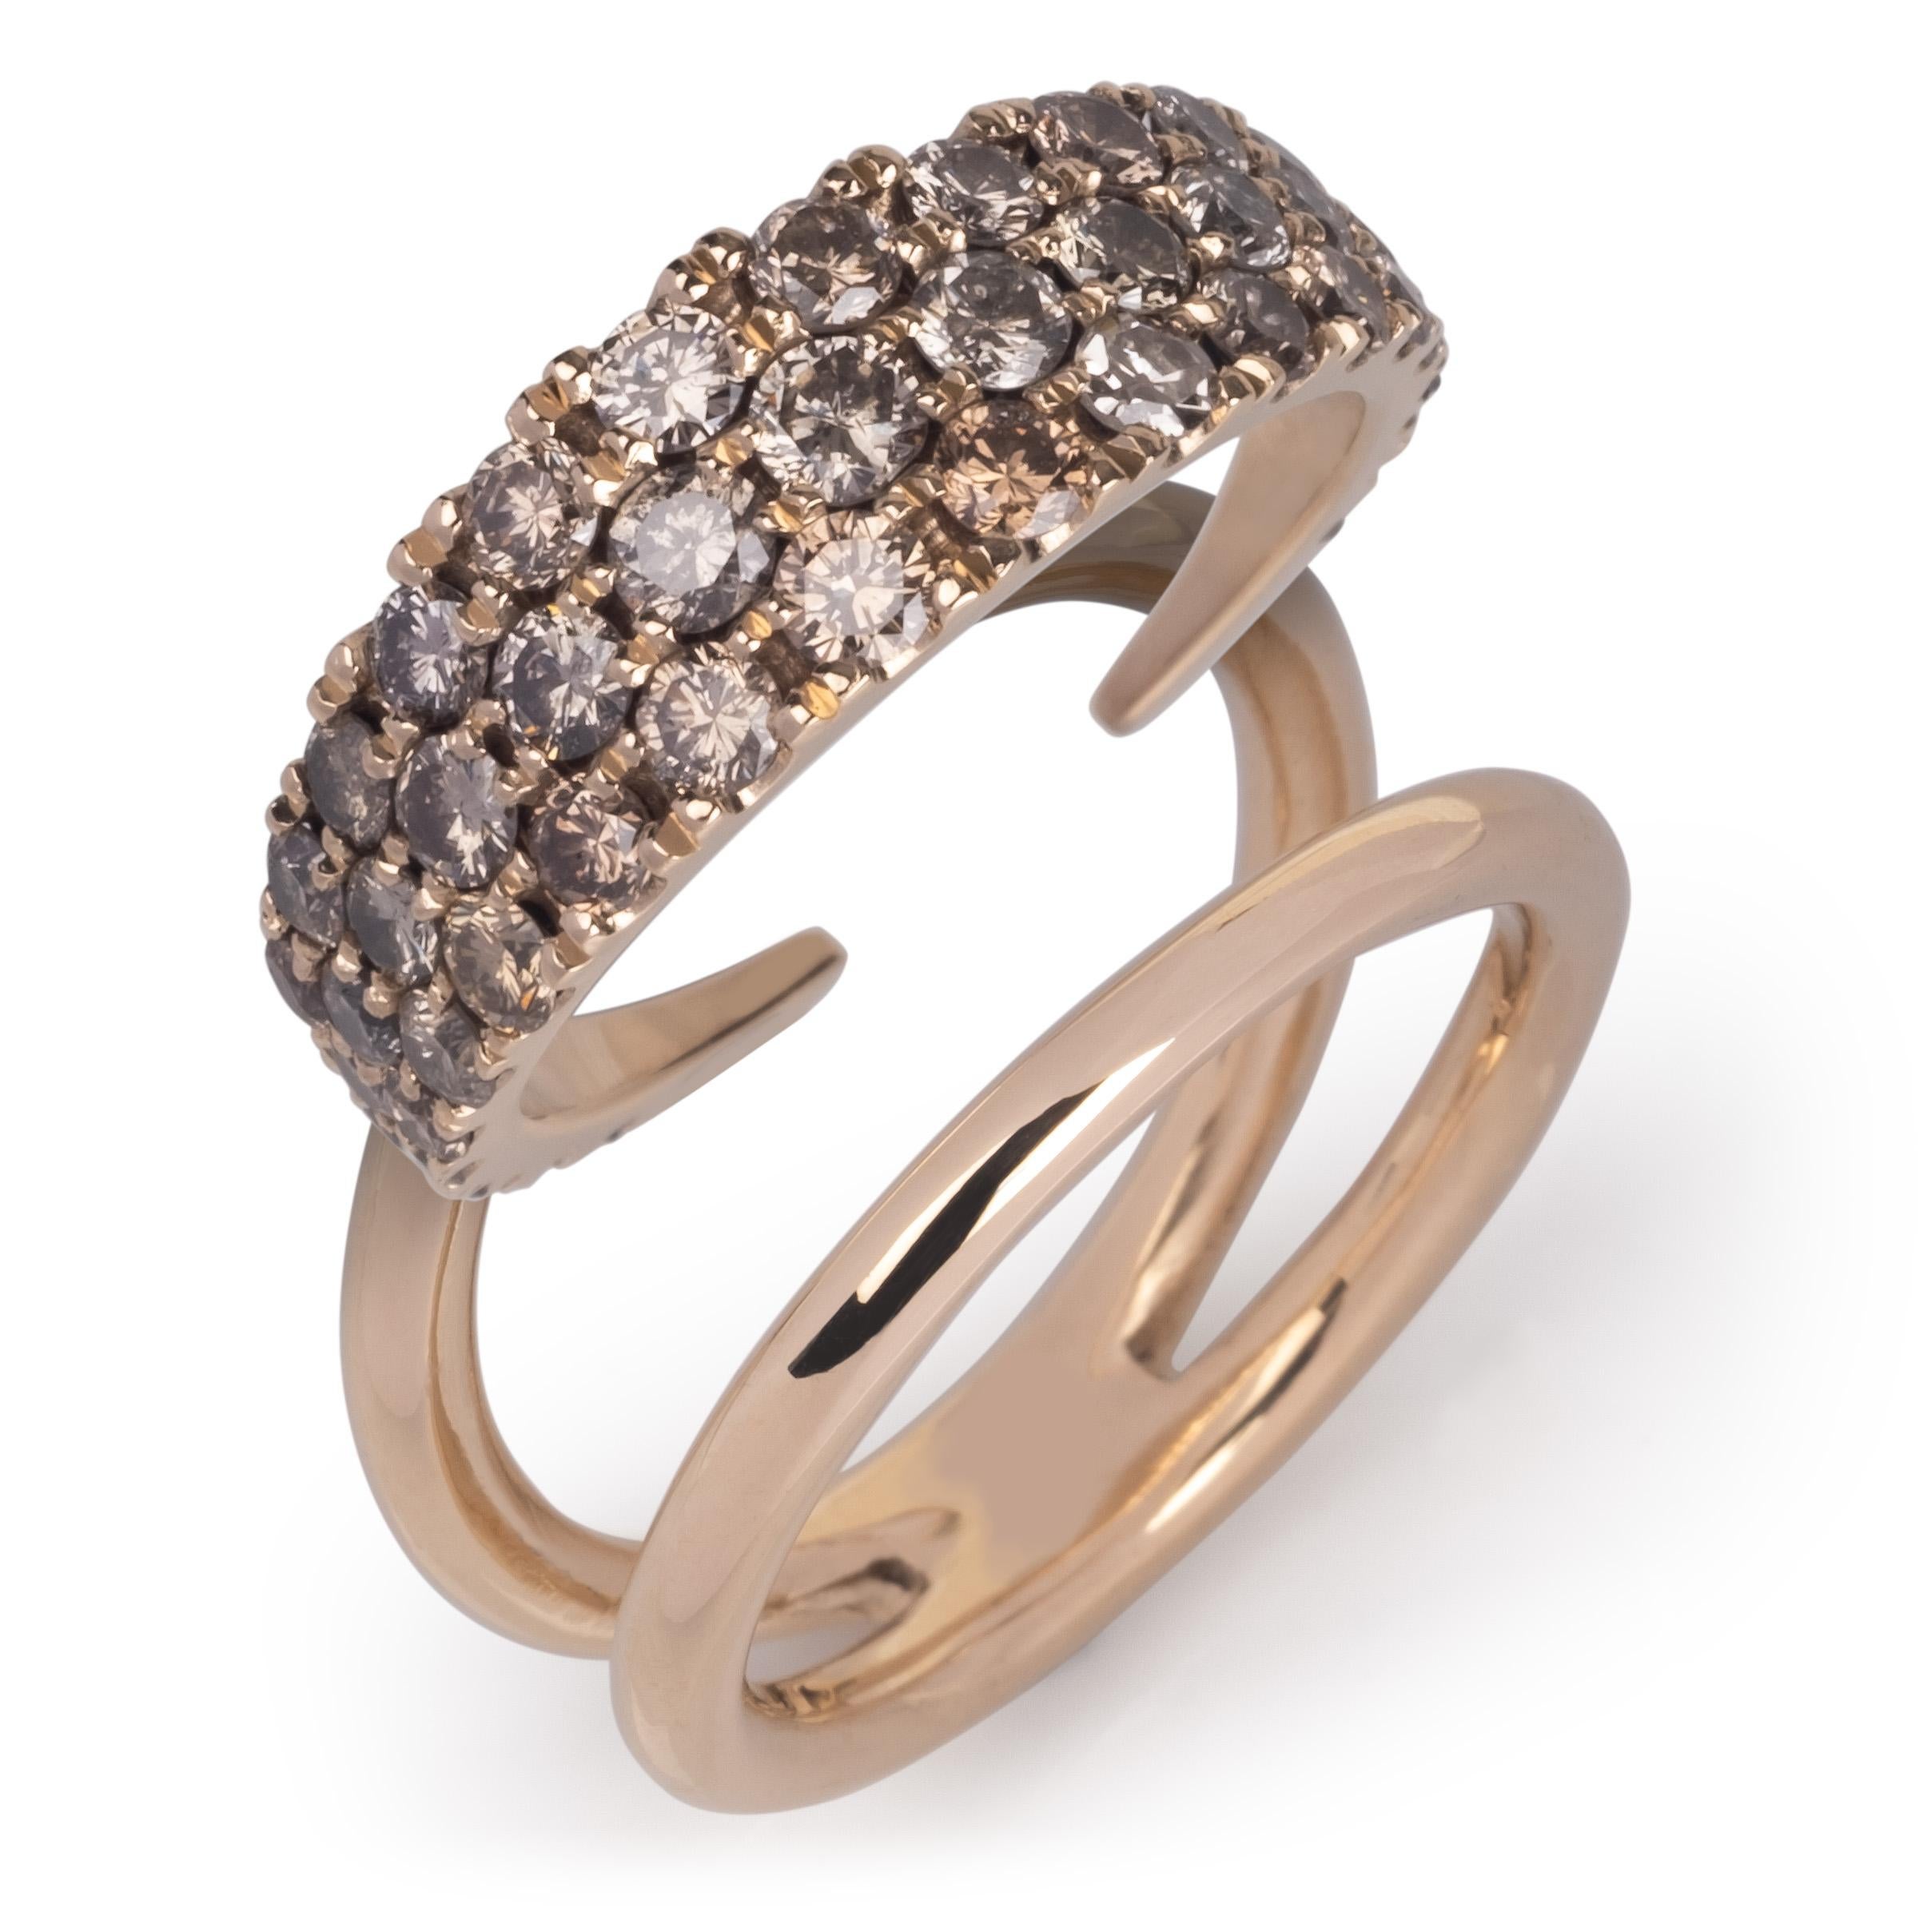 This sparkling champagne diamond ring has a surprise! It's actually a two-piece interchangeable ring. The wedge inserts into the outside ring and creates endless possibilities. 
The rings are customizable and the combinations you choose will reflect